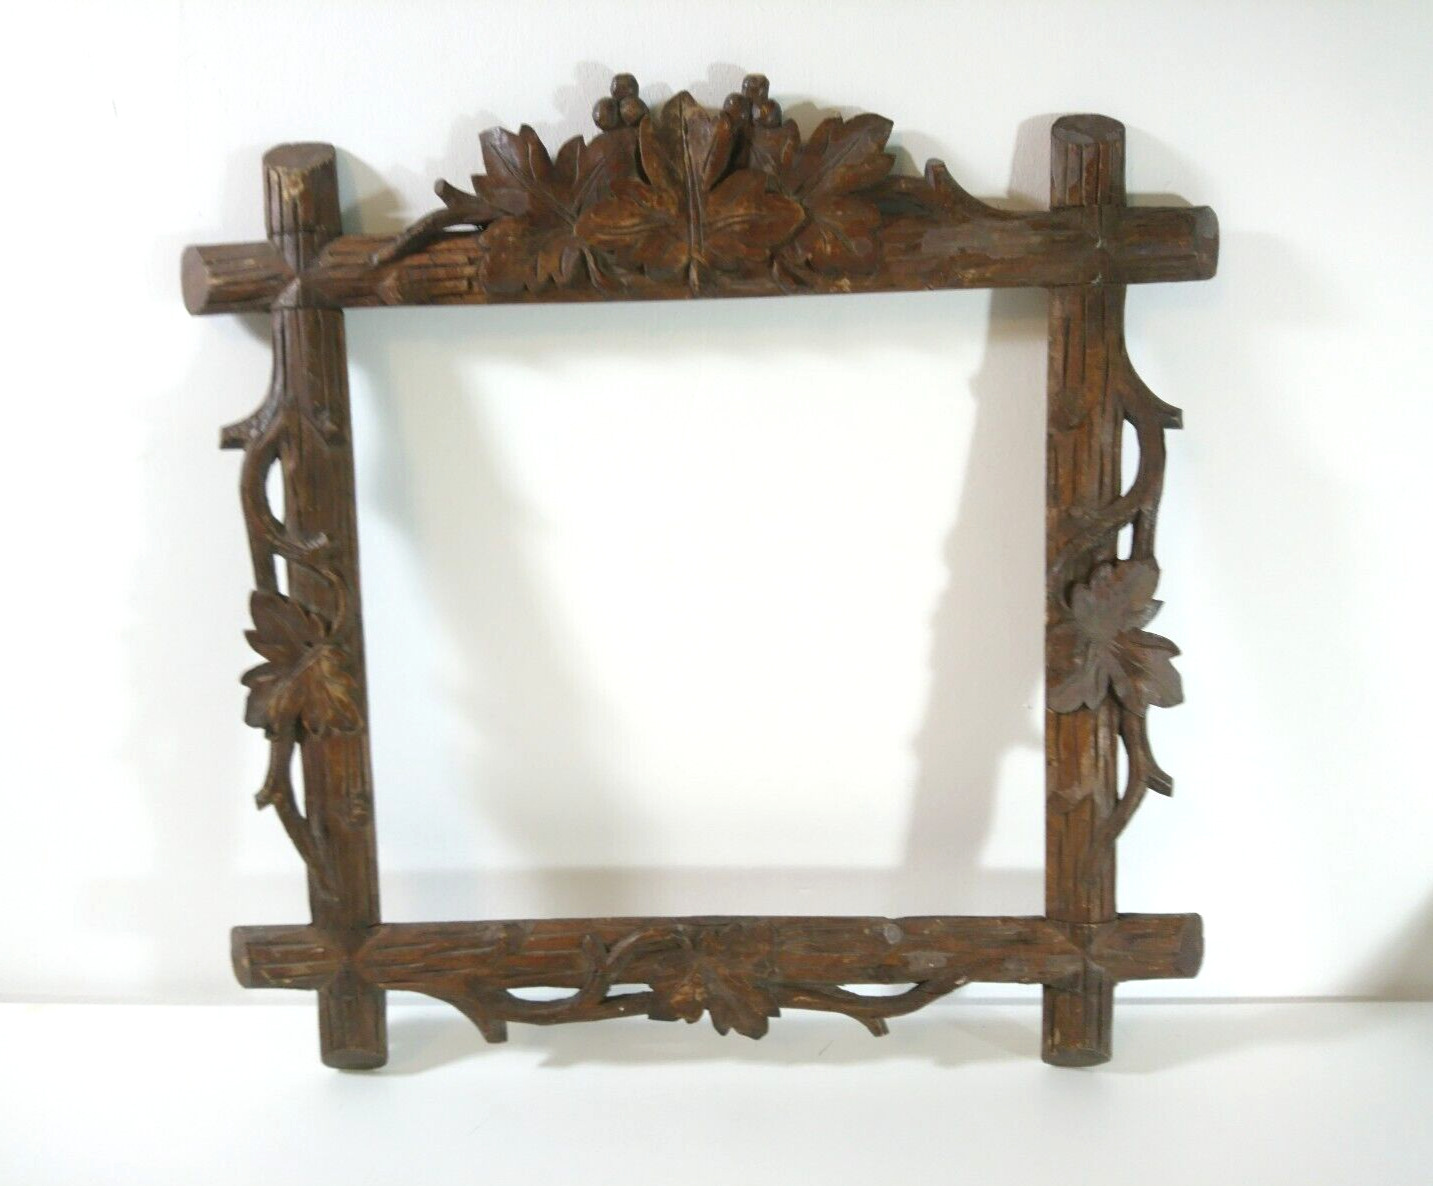 Antique Black Forest Picture Frame, Hand Carved Wood  1900s Austria